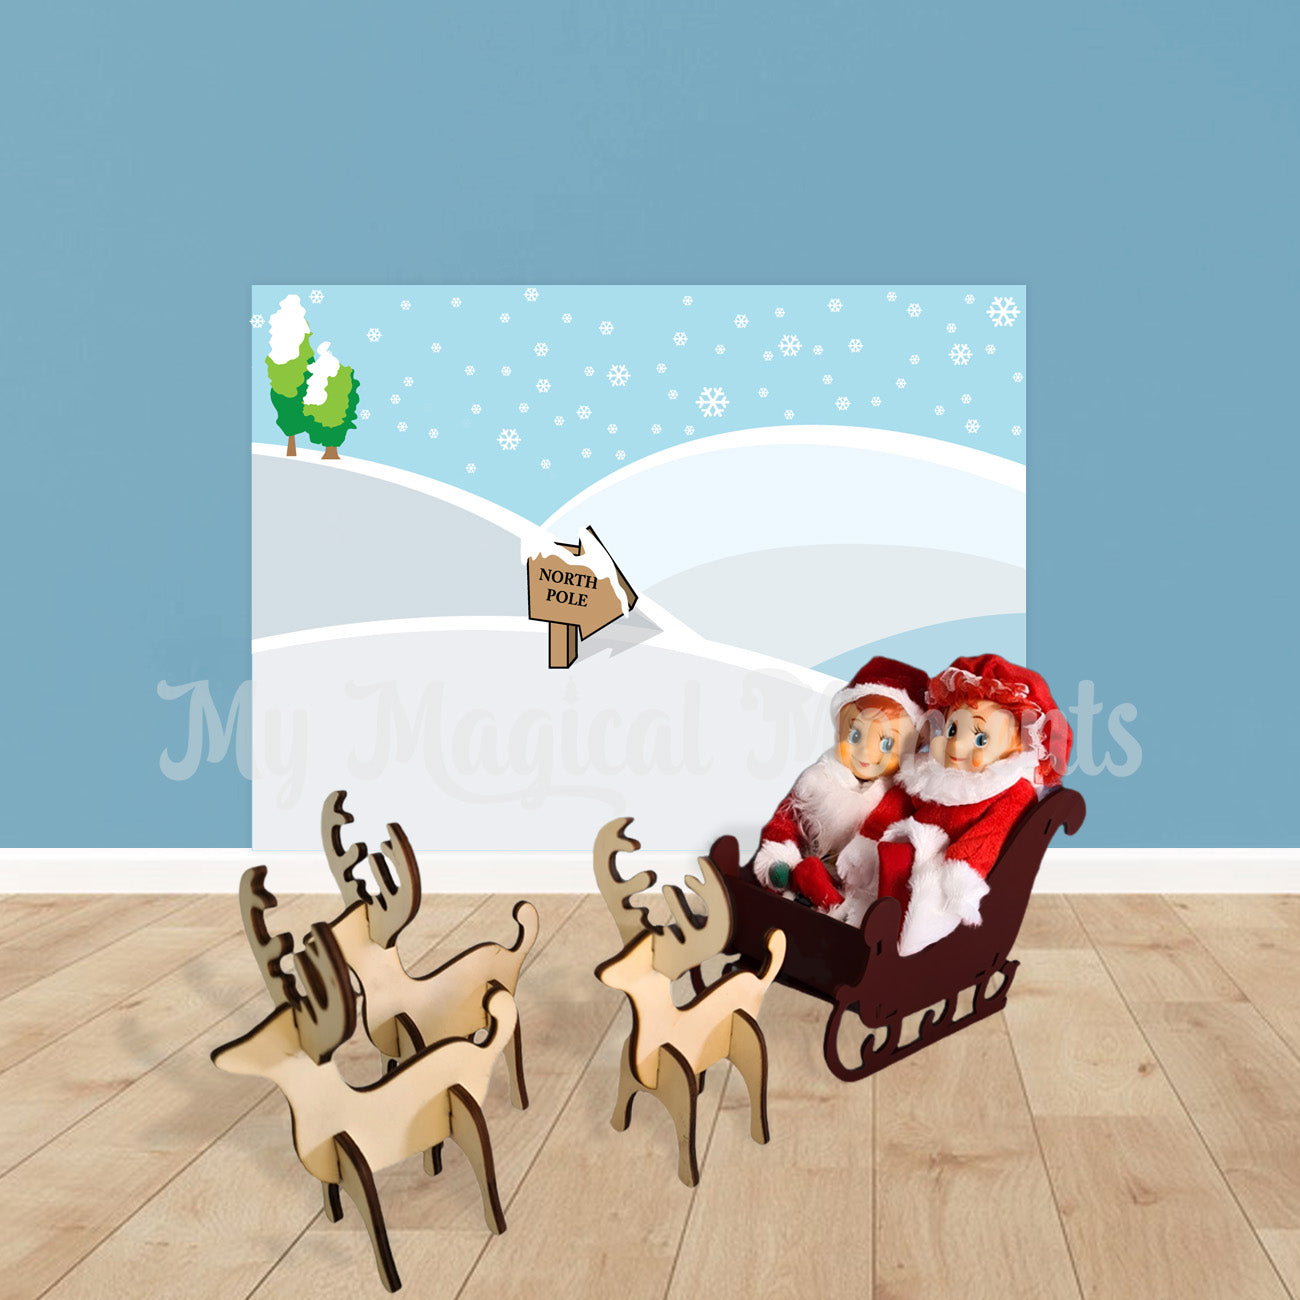 Elves dressed Santa and Mrs Claus riding in a sleigh pulled by wooden reindeer ornaments